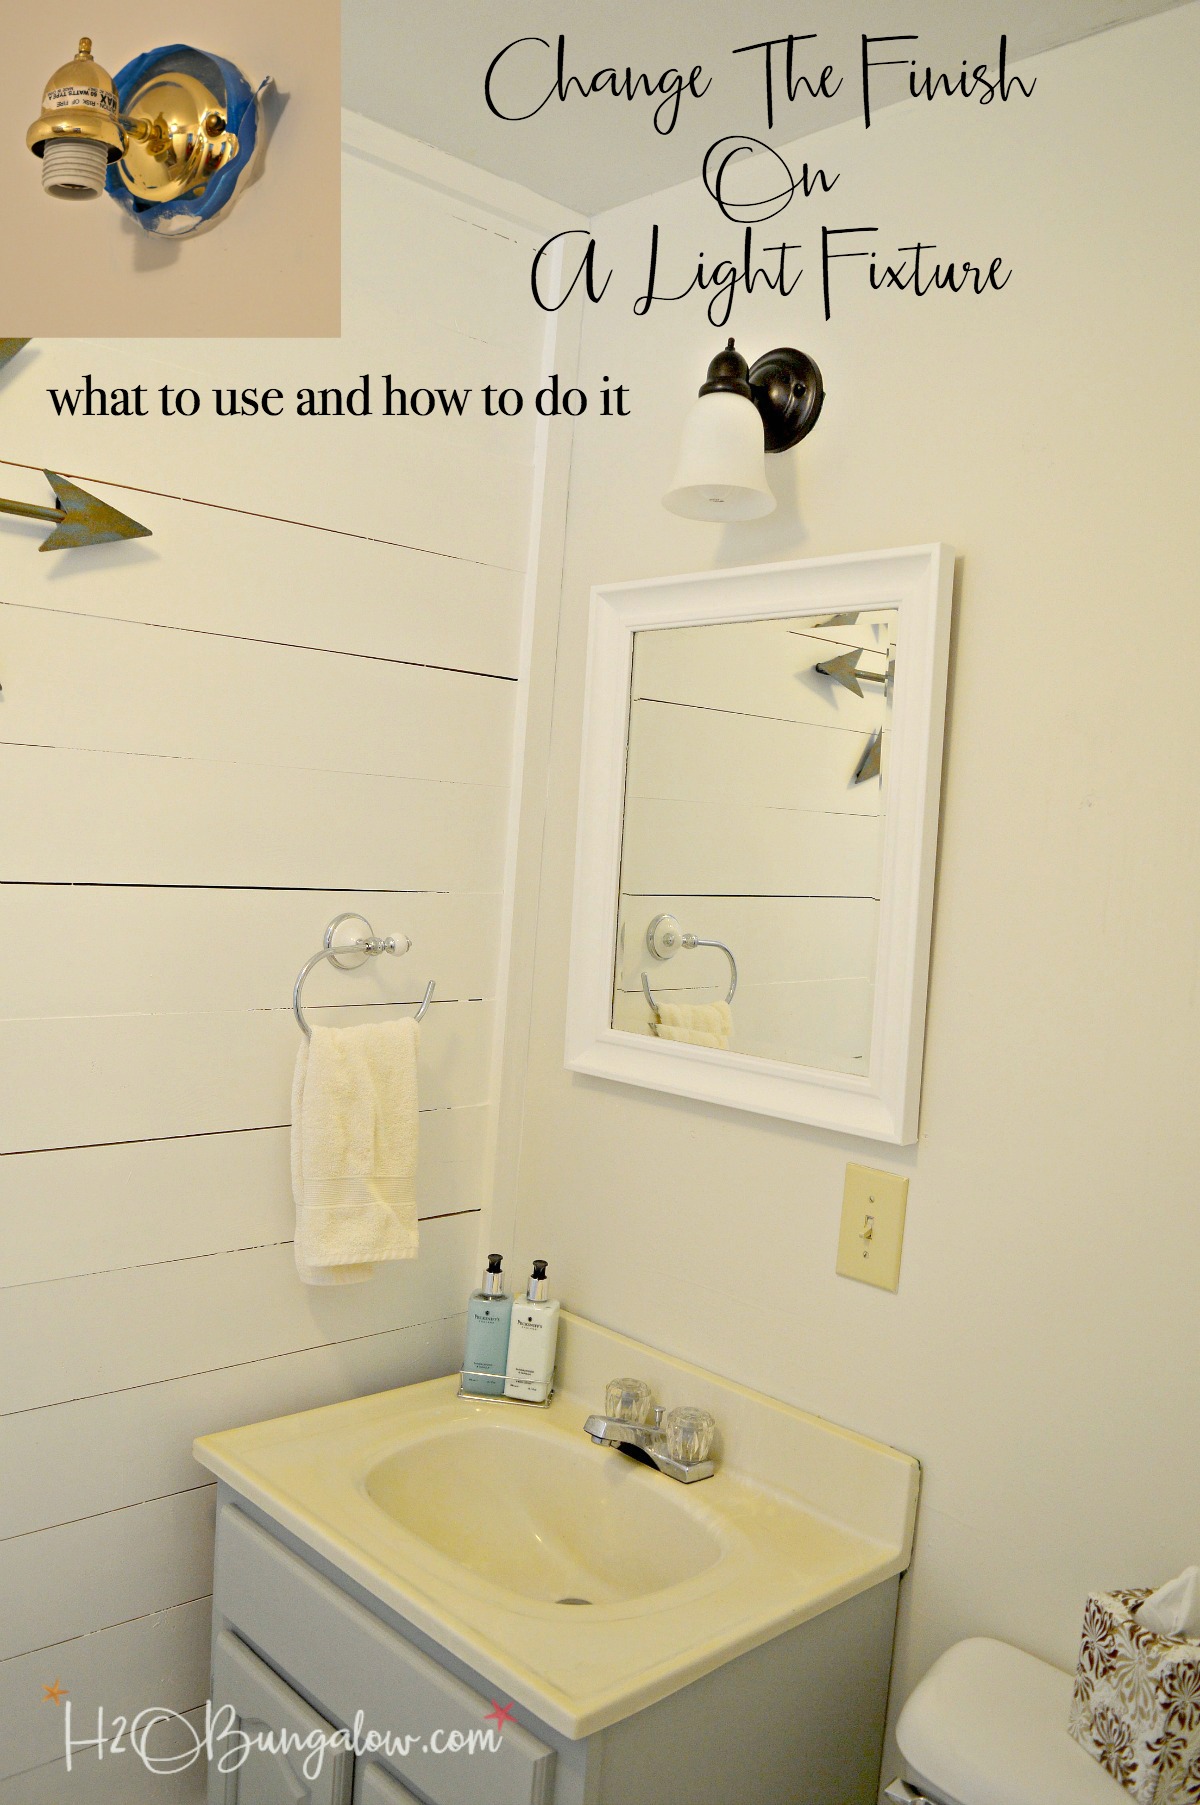 How To Paint A Metal Light Fixture, How To Remove Bathroom Light Fixture Paint